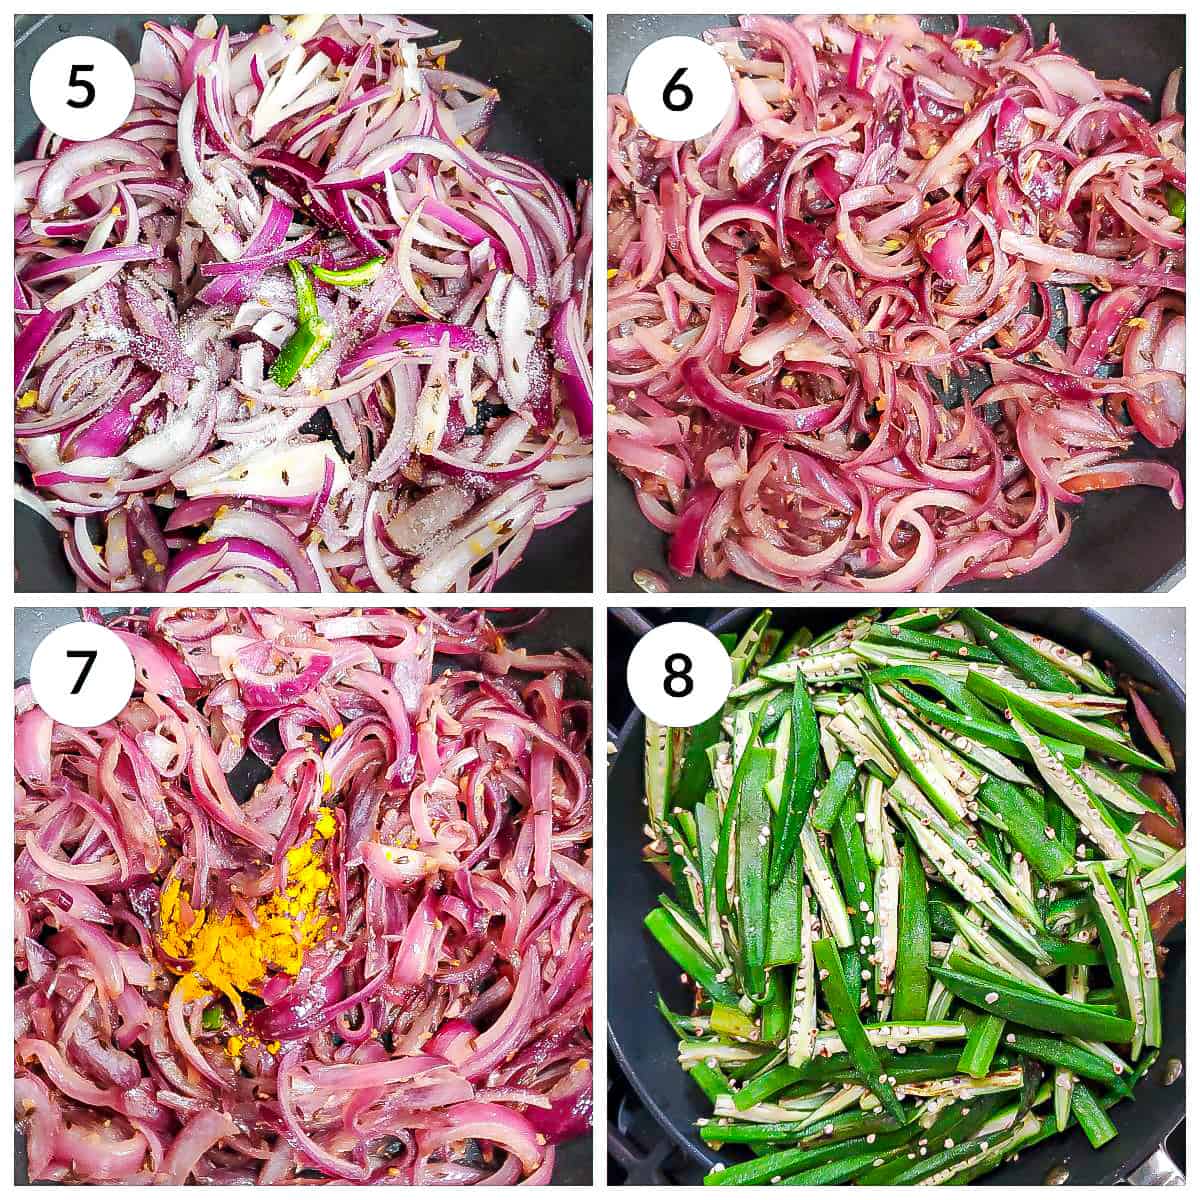 Steps for sauteing onions, ginger and green chili until onions are soft for bhindi do pyaza